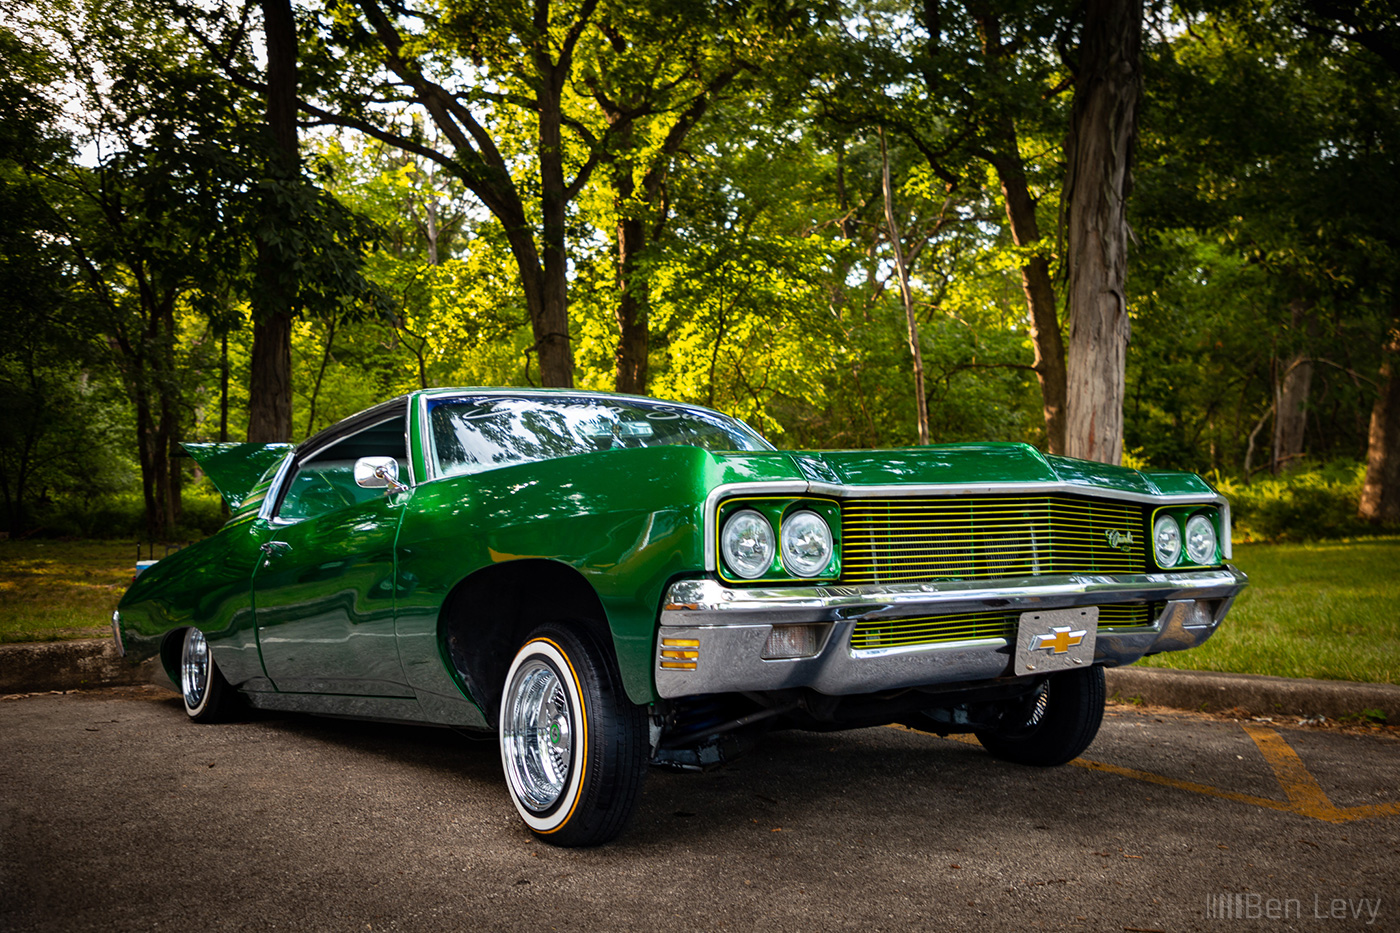 Lowrider Chevy Caprice with Custom Green Paint